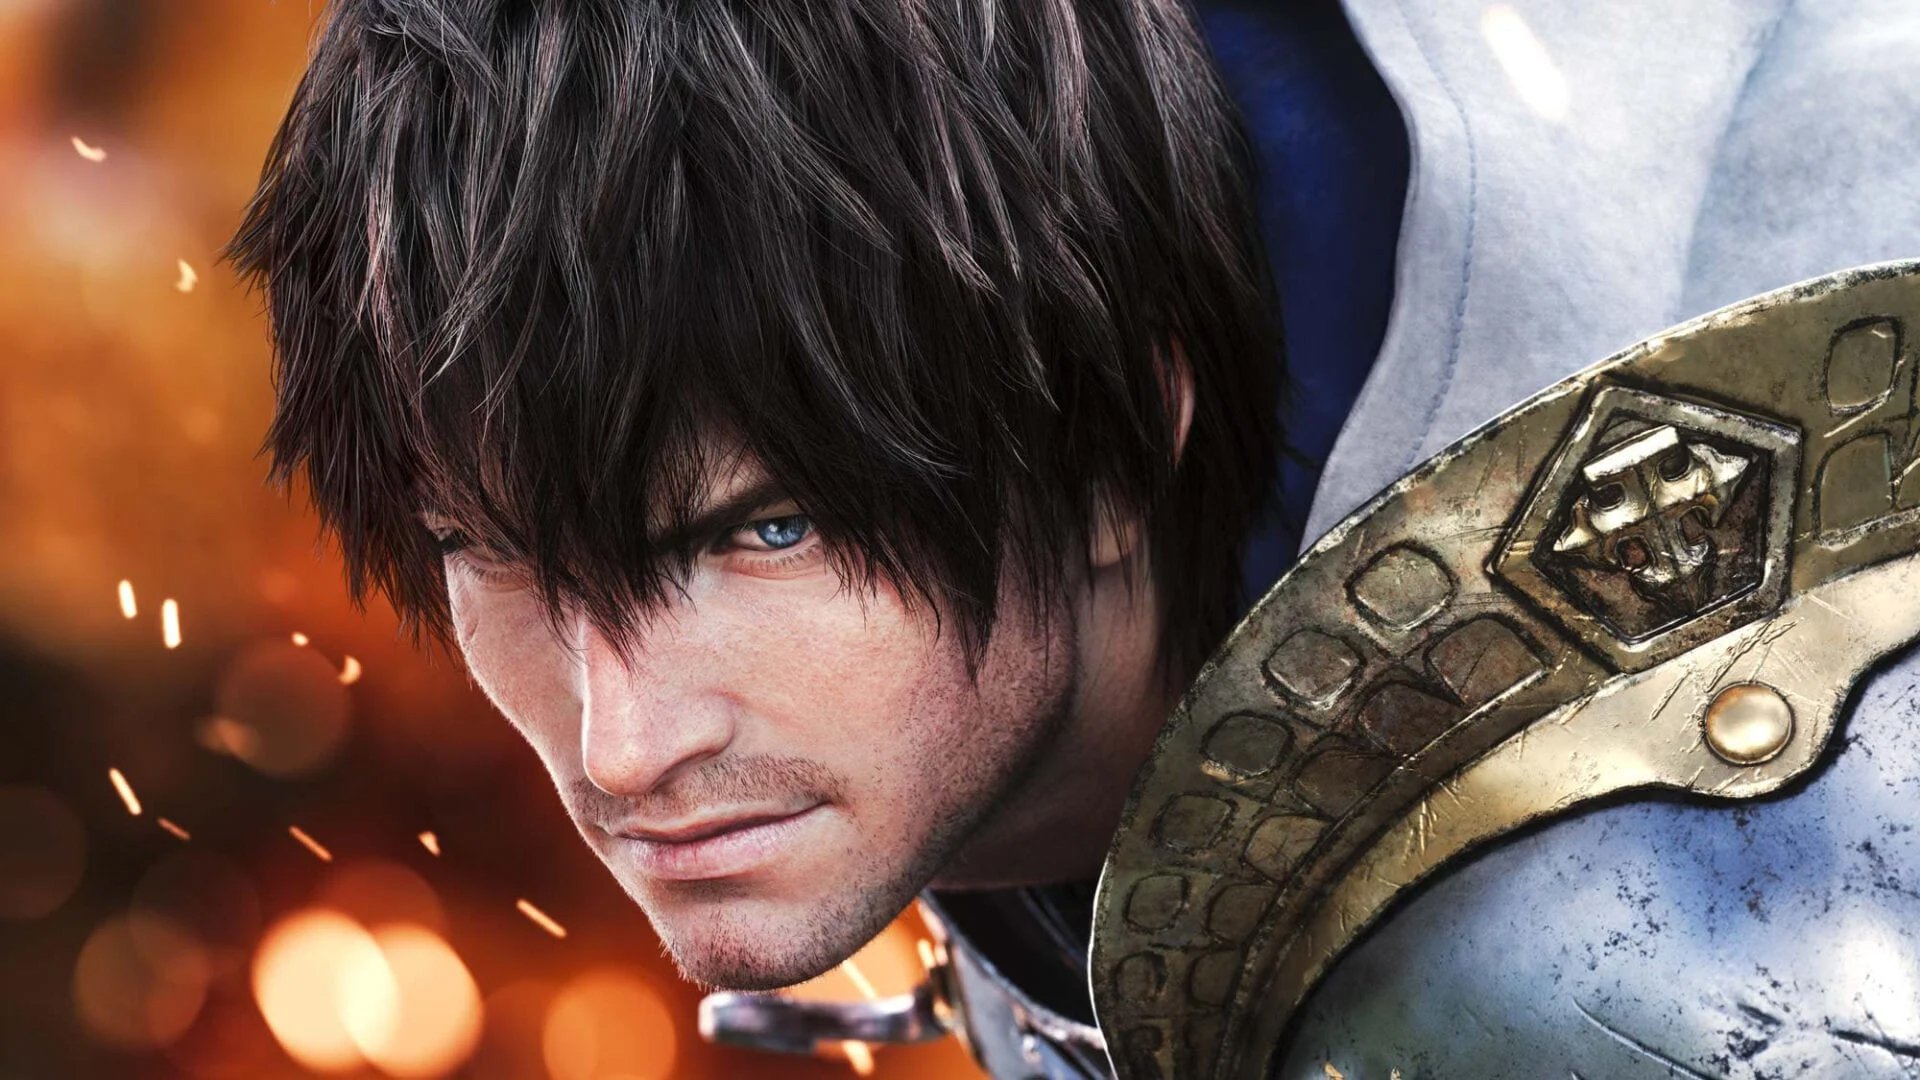  Final Fantasy 14: Endwalker: Release date, new jobs, story, and everything we know so far 